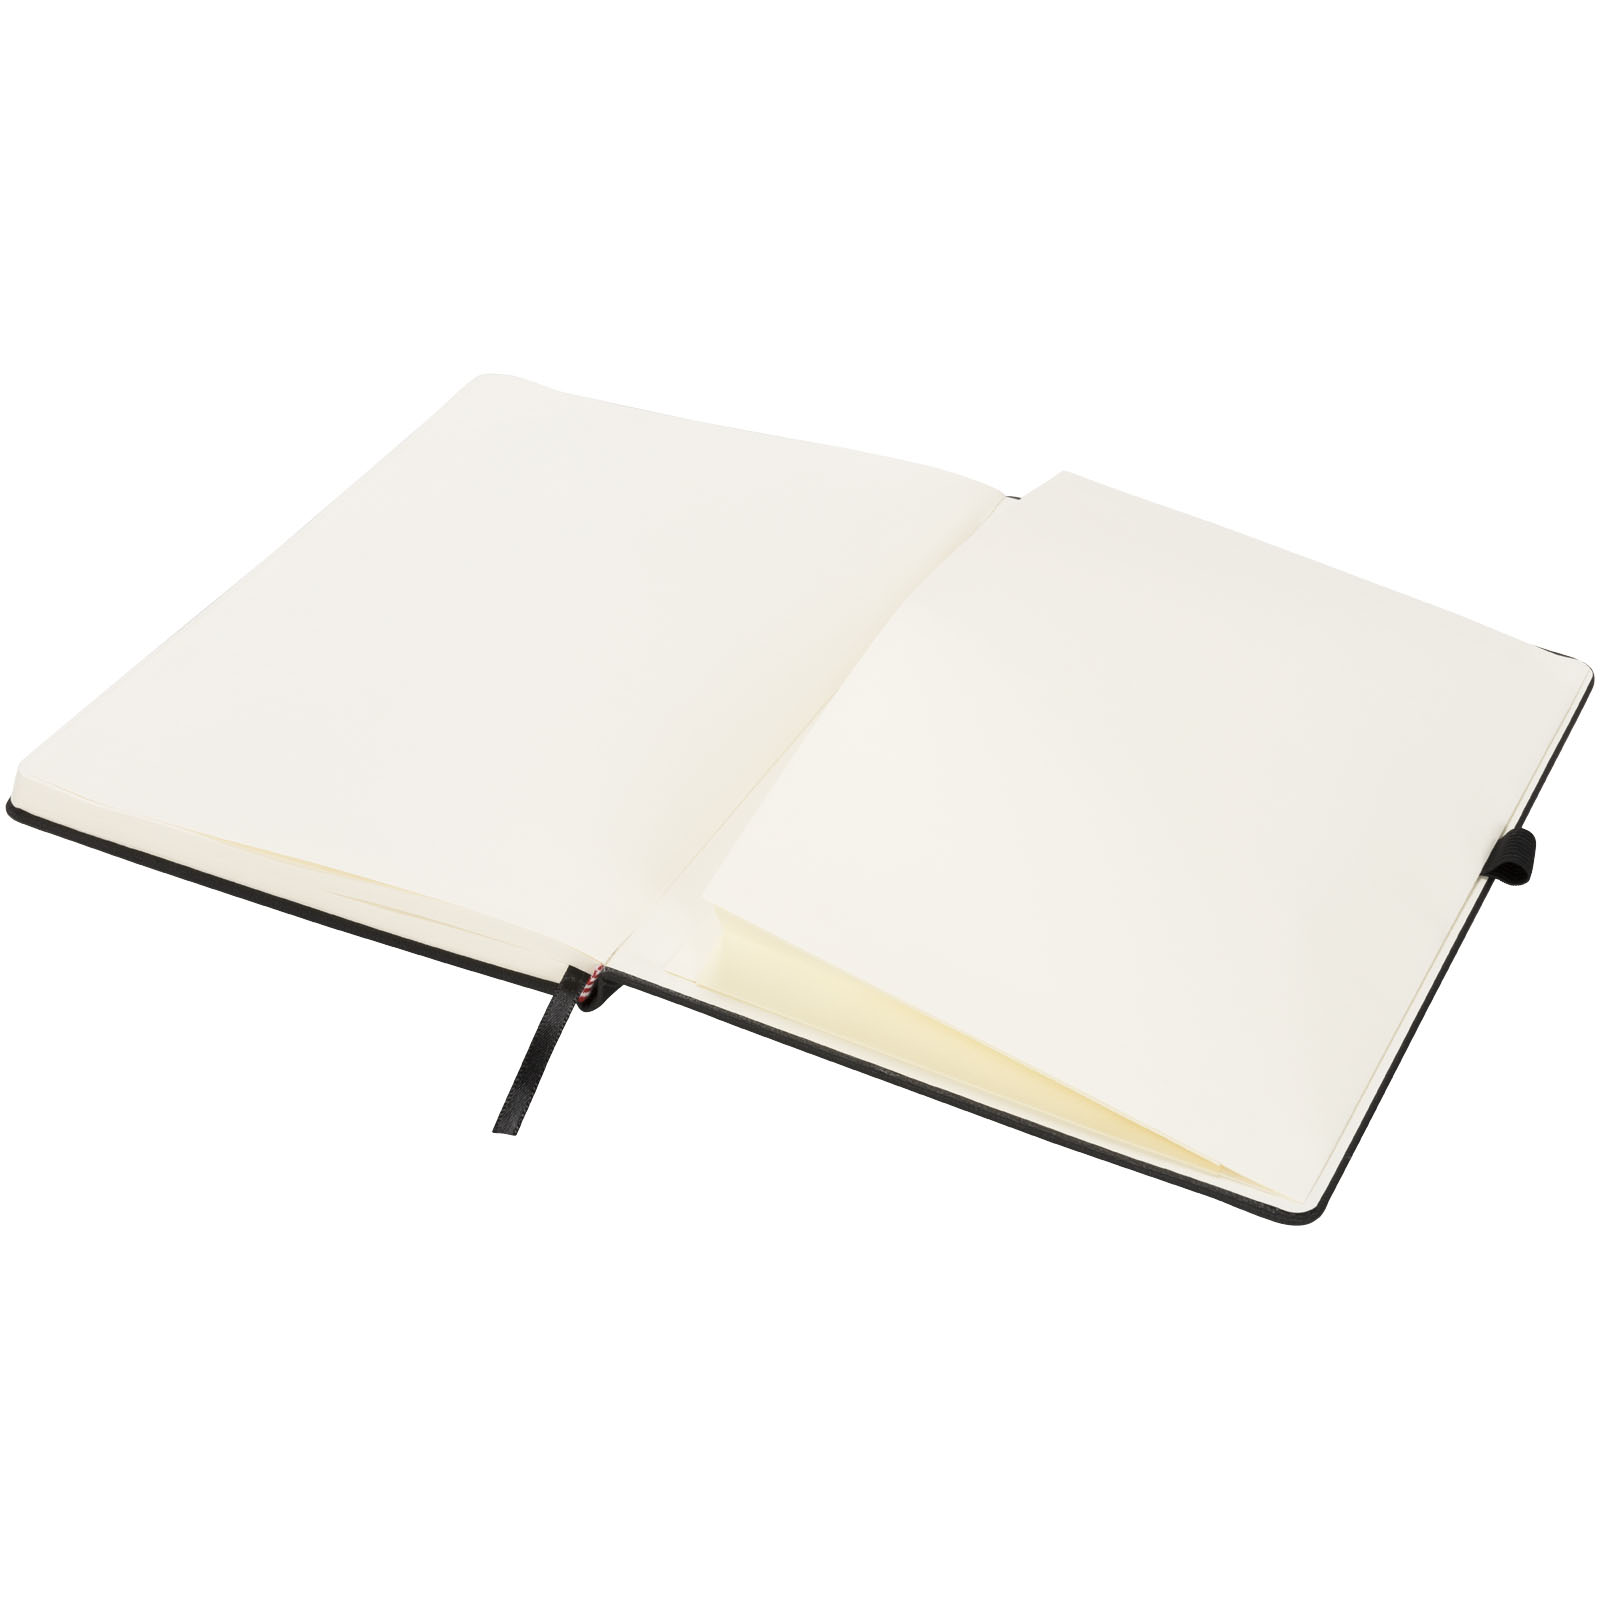 Advertising Hard cover notebooks - Rivista large notebook - 3